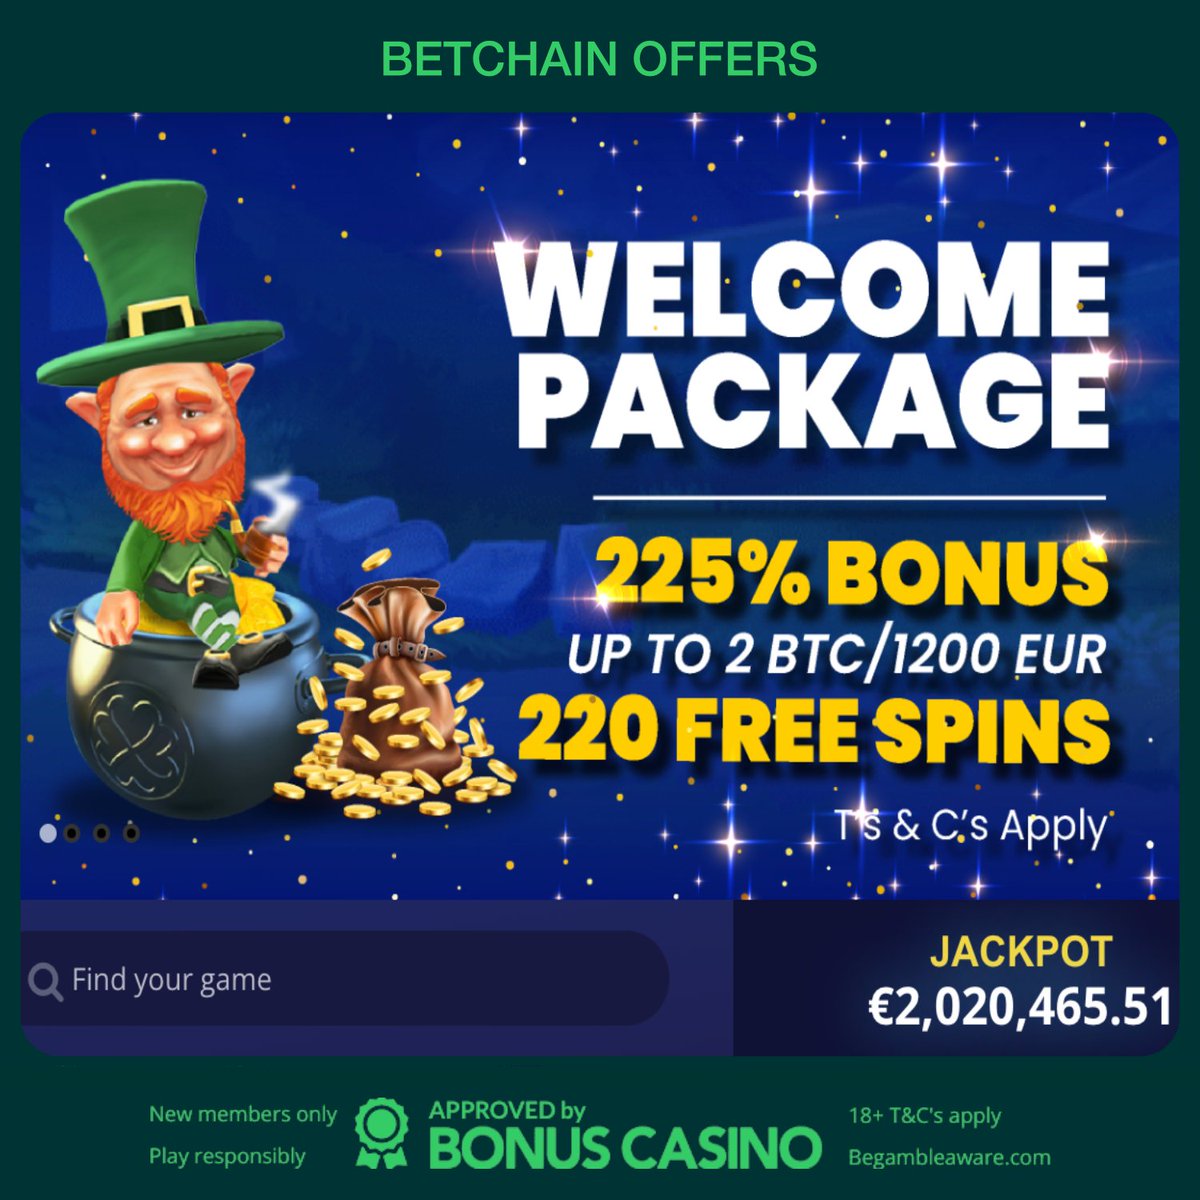 Looking for a solid #crypto brand? @Betchain you'll find anything you need in terms of promos & support😎 #bitcoincasino #bonusday 
bonuscasino.org/casinos/betcha…